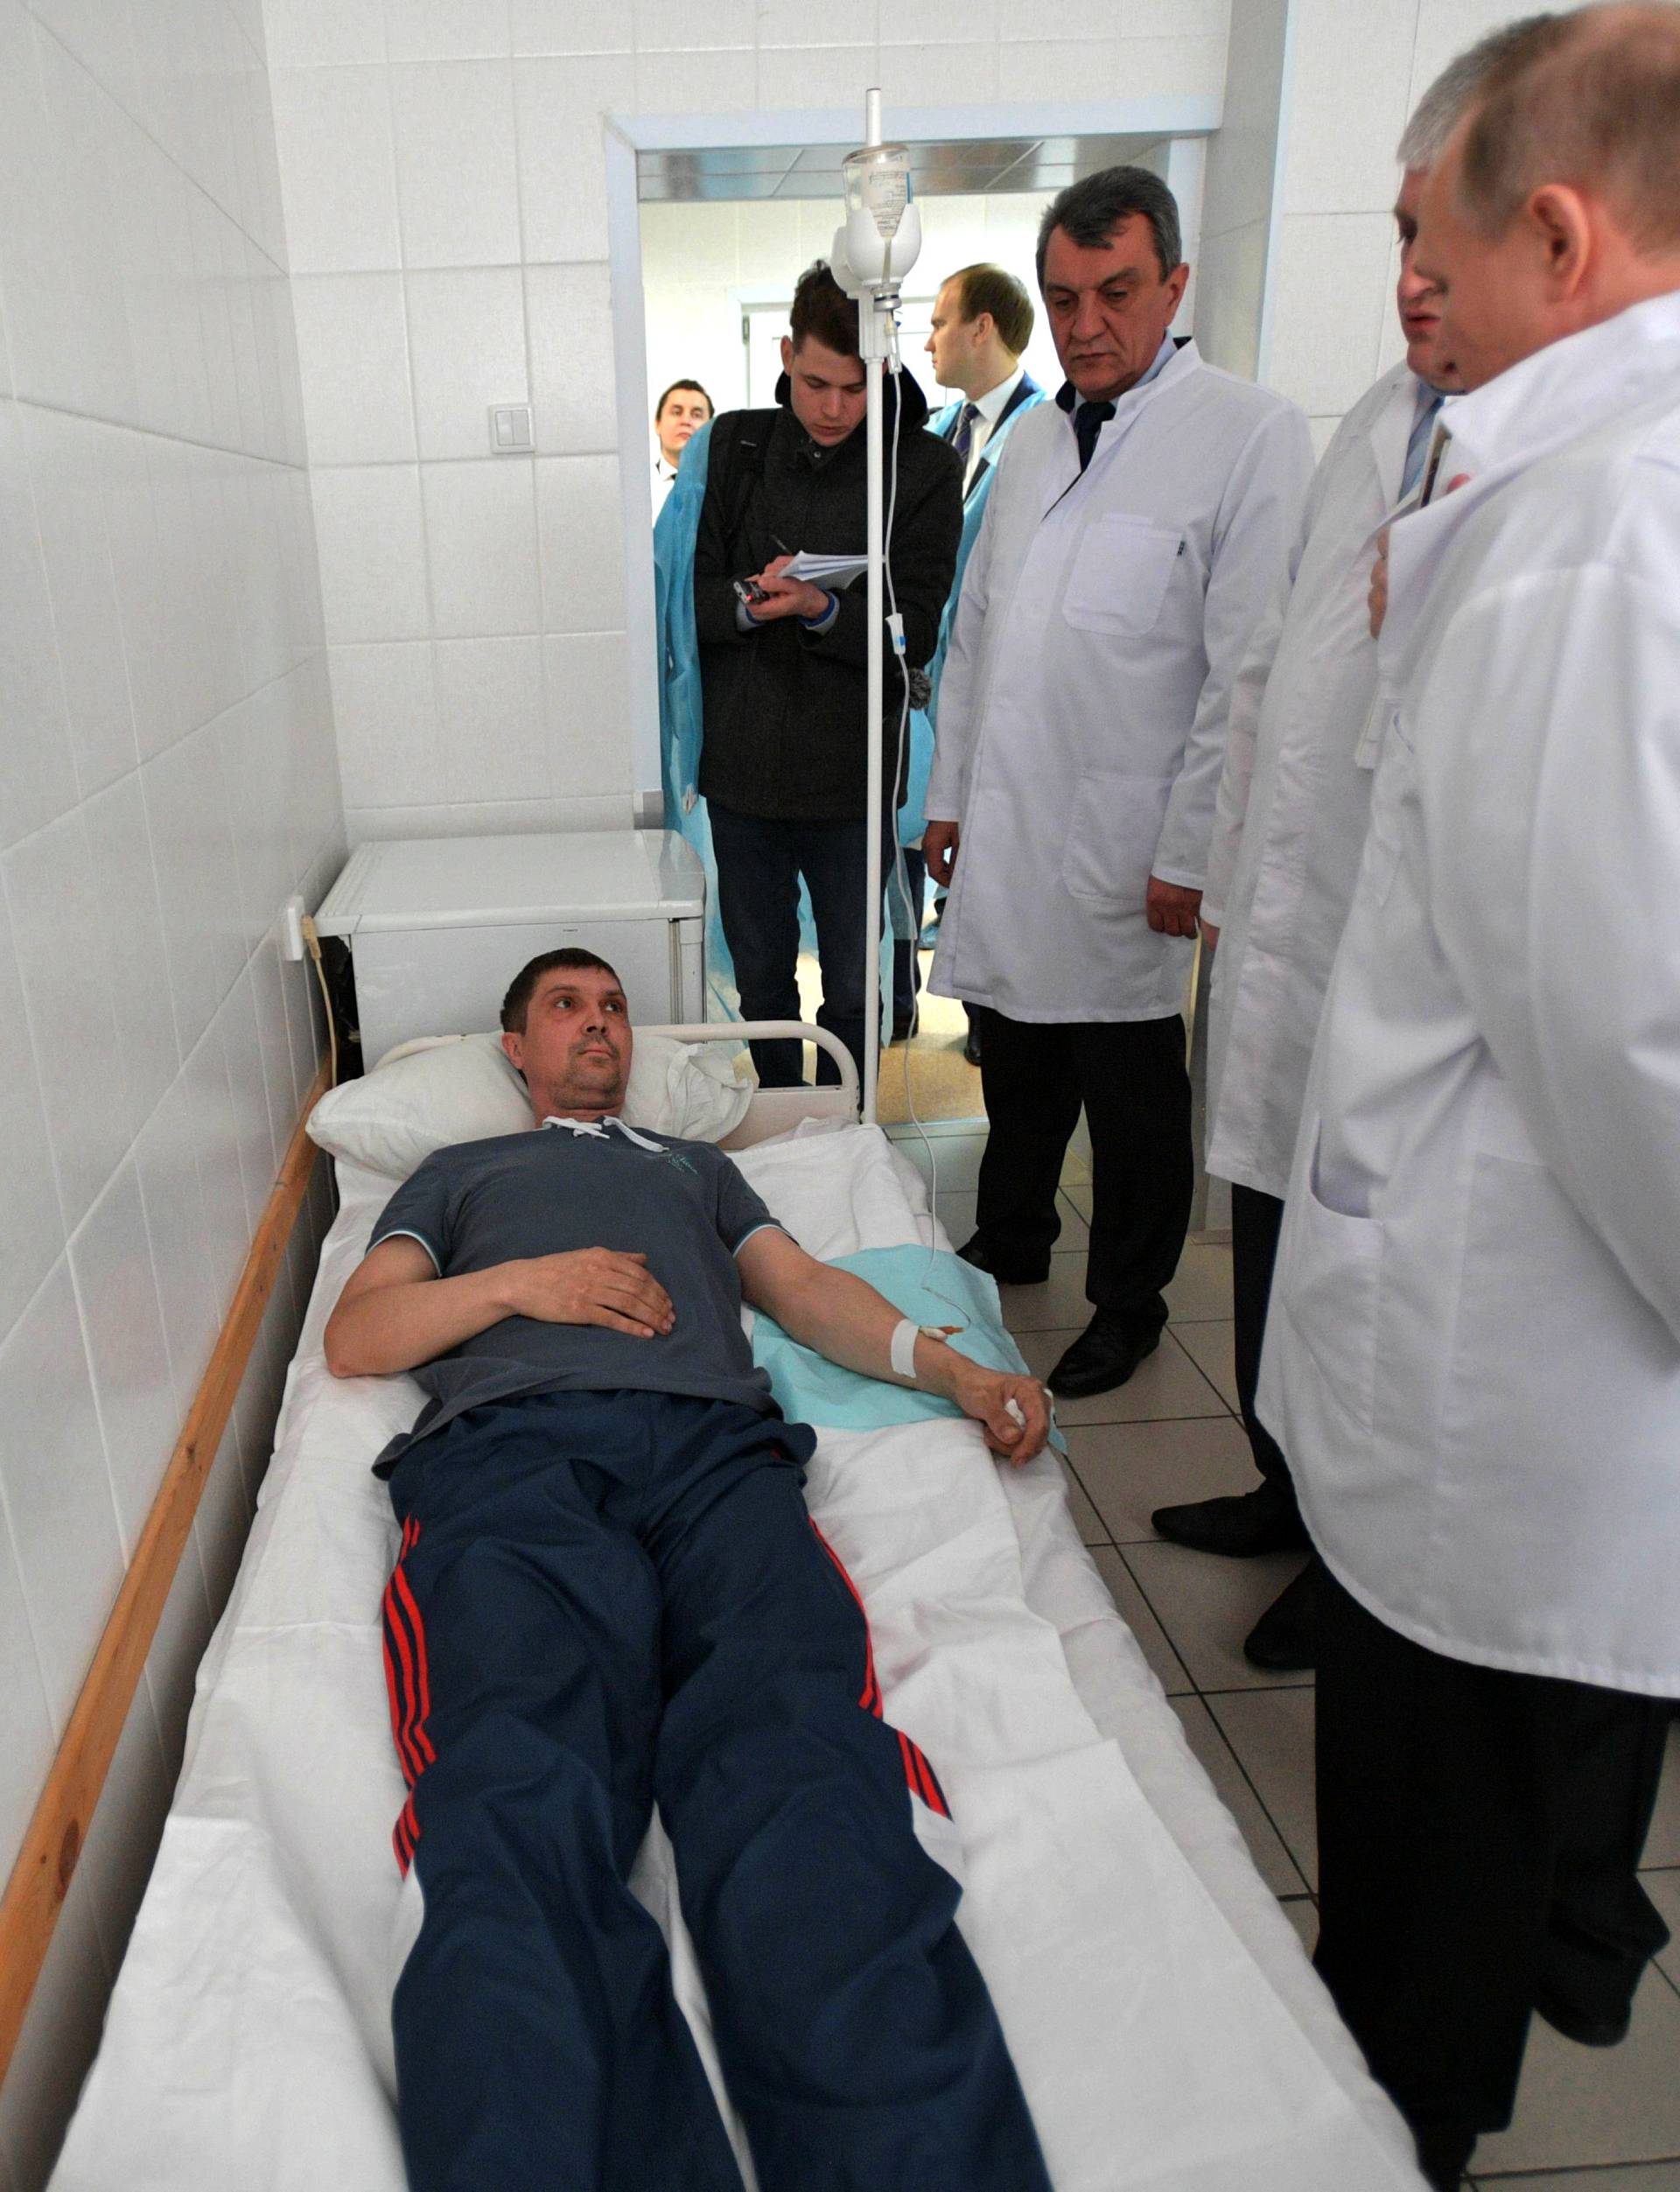 Russian President Vladimir Putin meets with victims injured during a fire in a shopping mall, at a hospital in Kemerovo